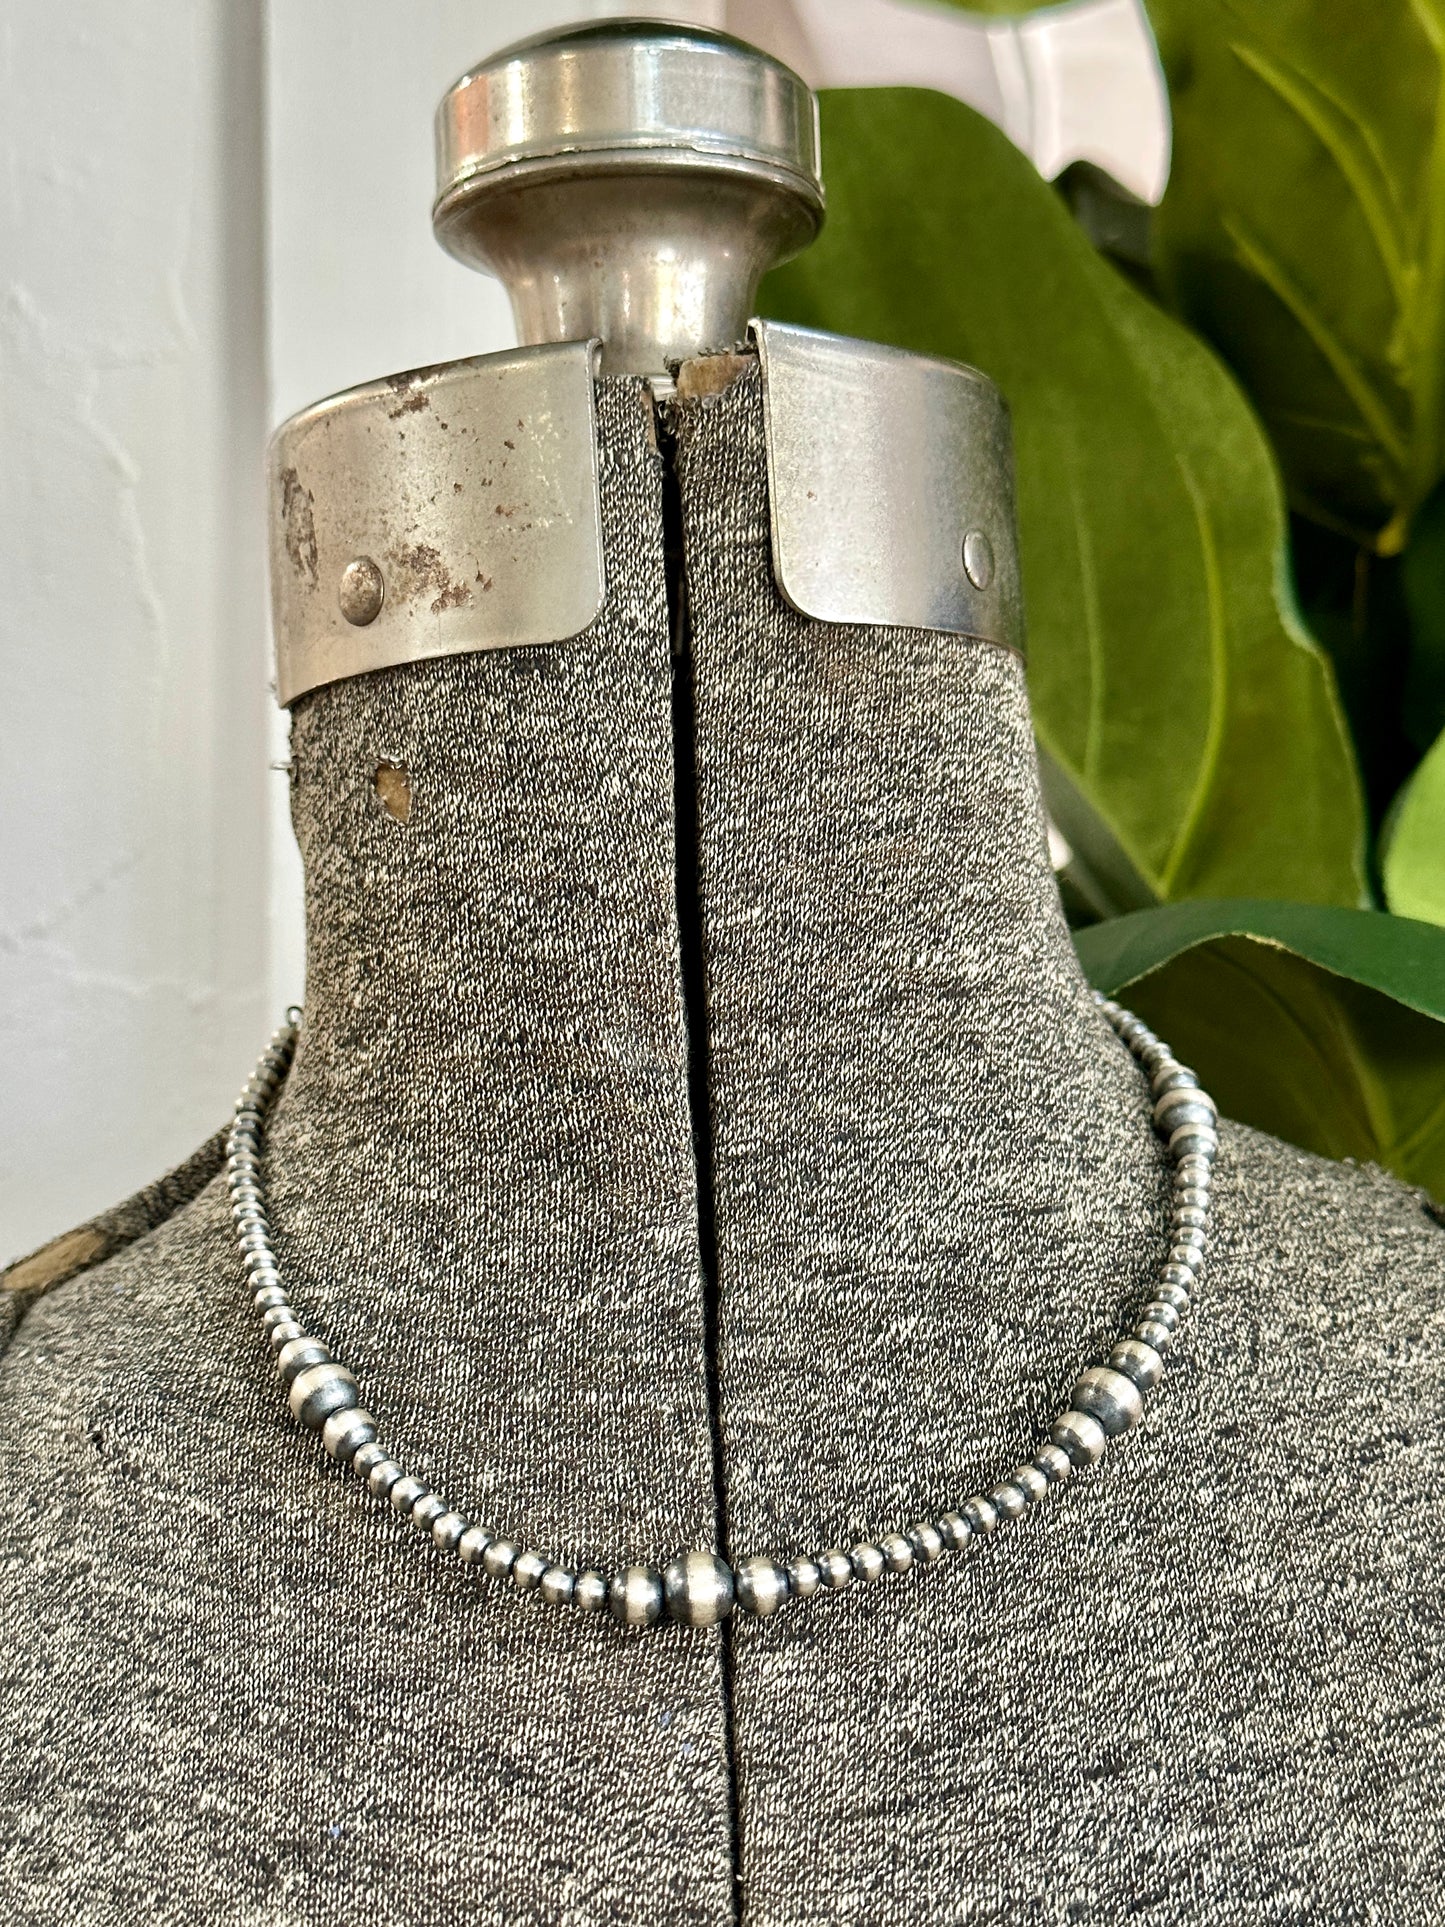 Sterling Silver Navajo Pearls Necklace